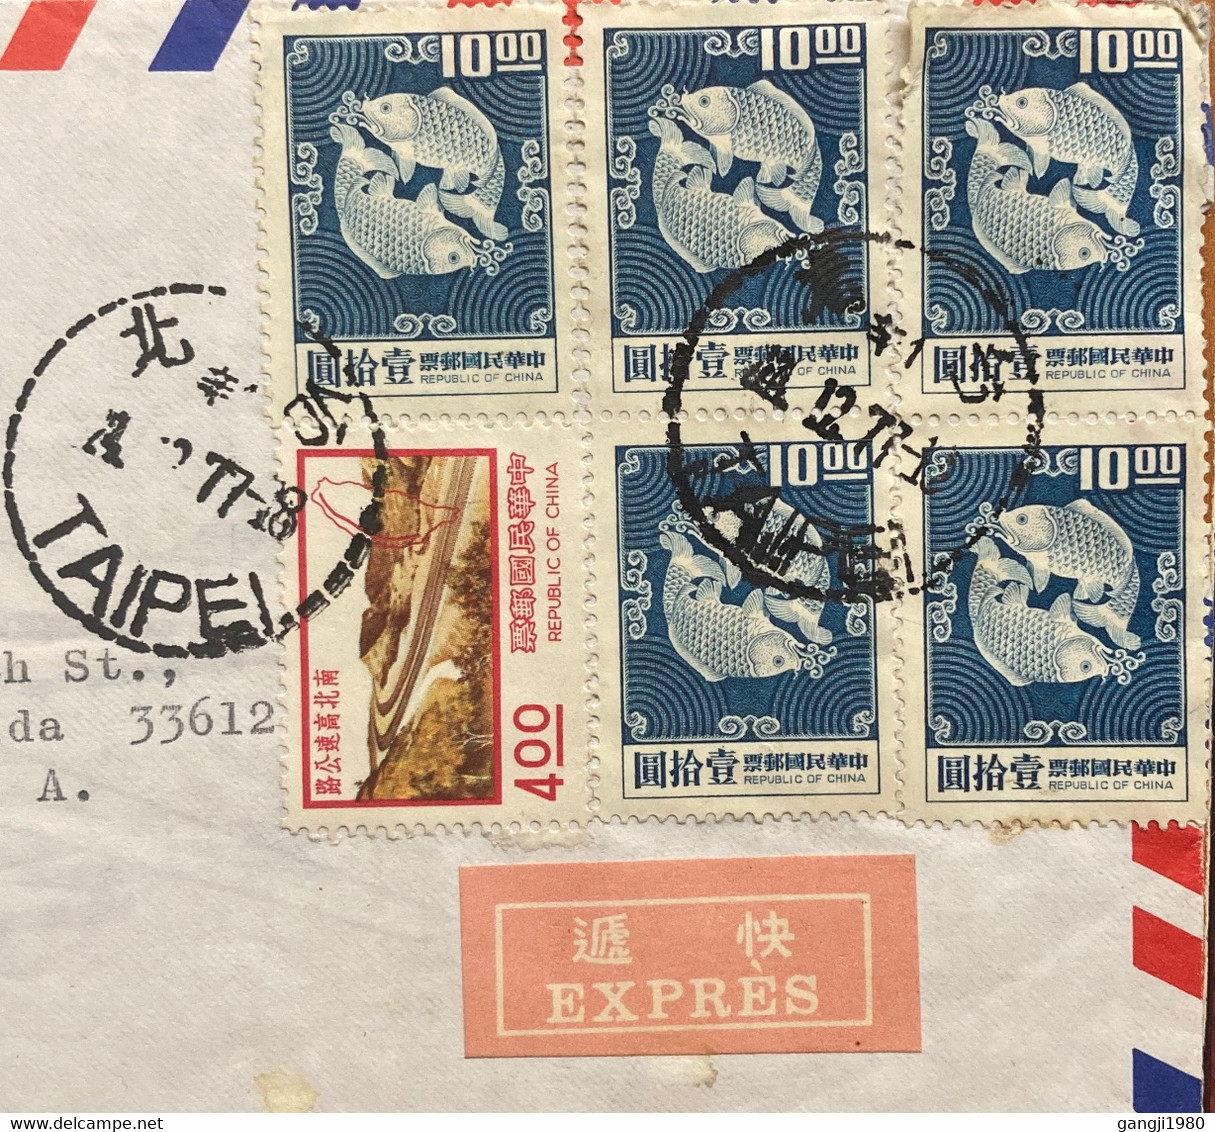 CHINA TAIWAN-1977, VIGNETTE “EXPRESS” LABEL USED COVER TO USA ,TUNG FOOK TRADING CO.ADVT PICTURE MATCHING FISH, SAME STA - Storia Postale